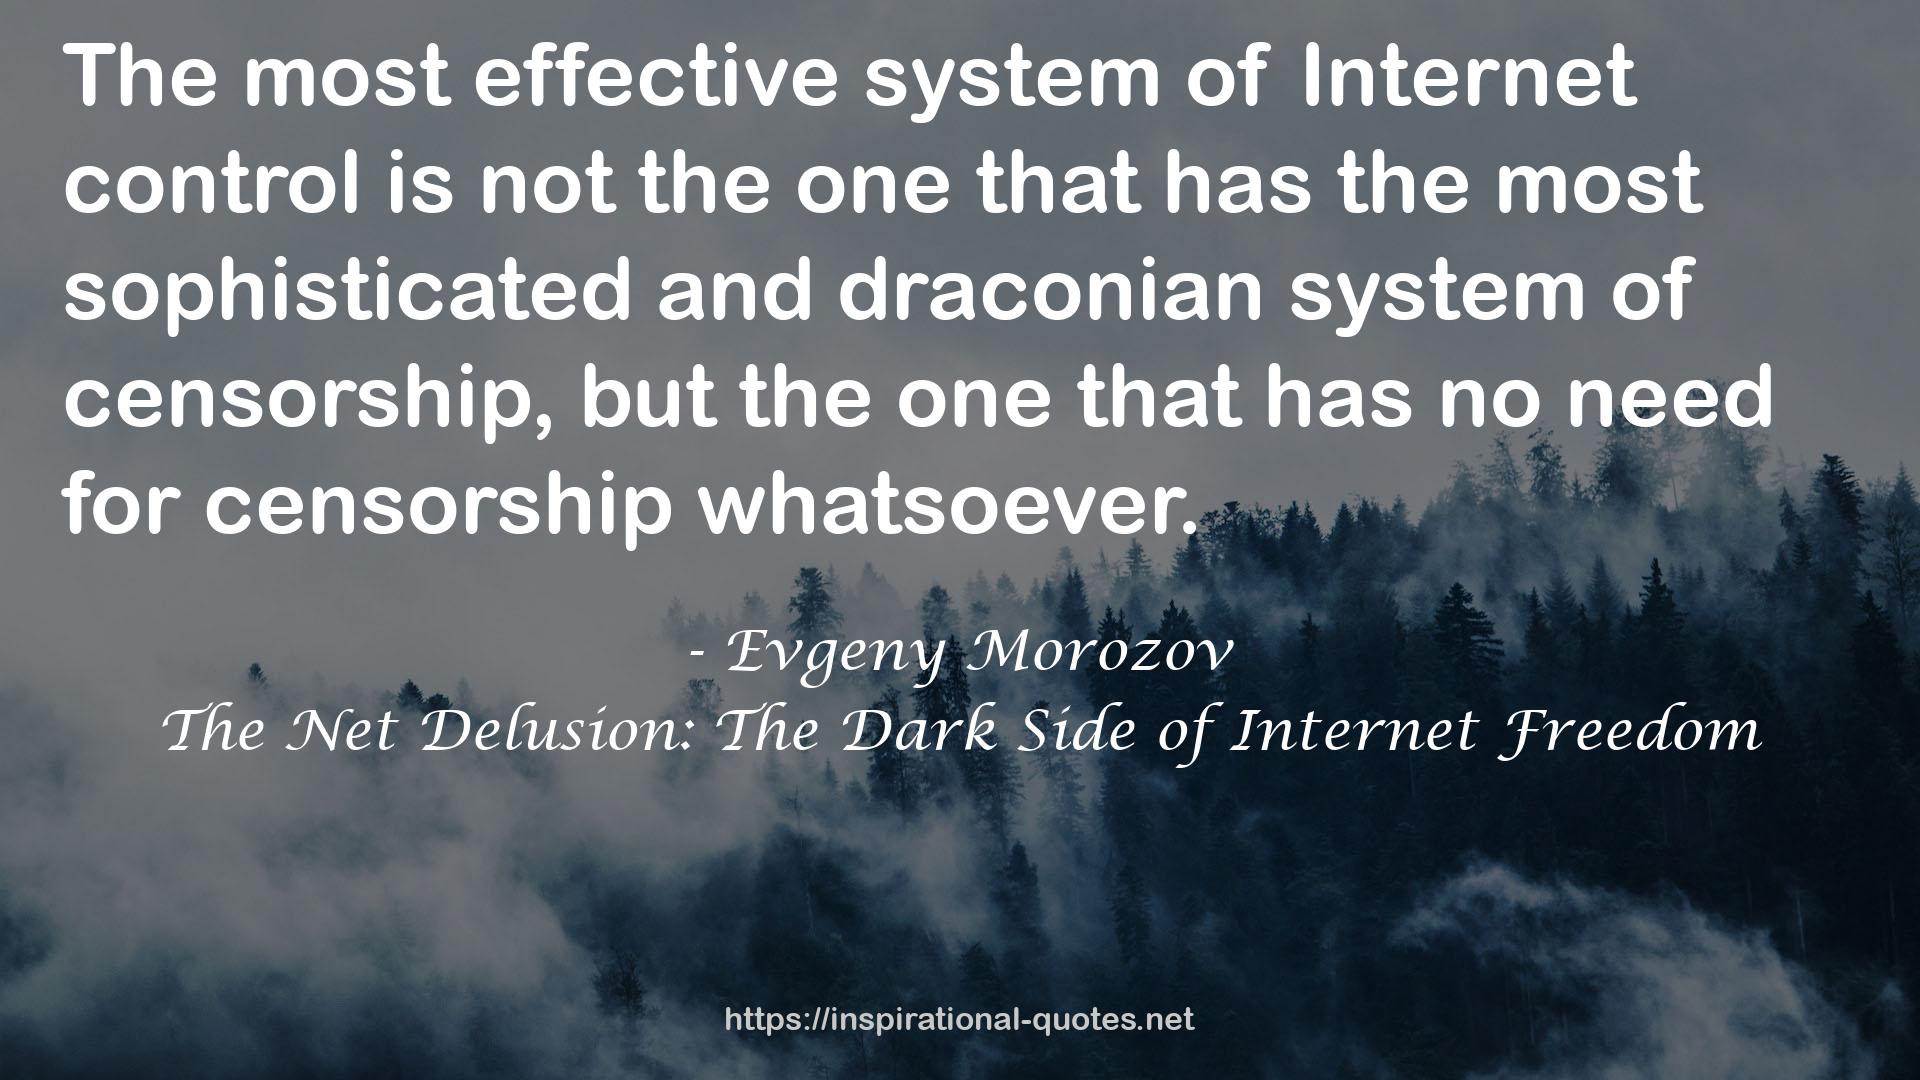 The Net Delusion: The Dark Side of Internet Freedom QUOTES